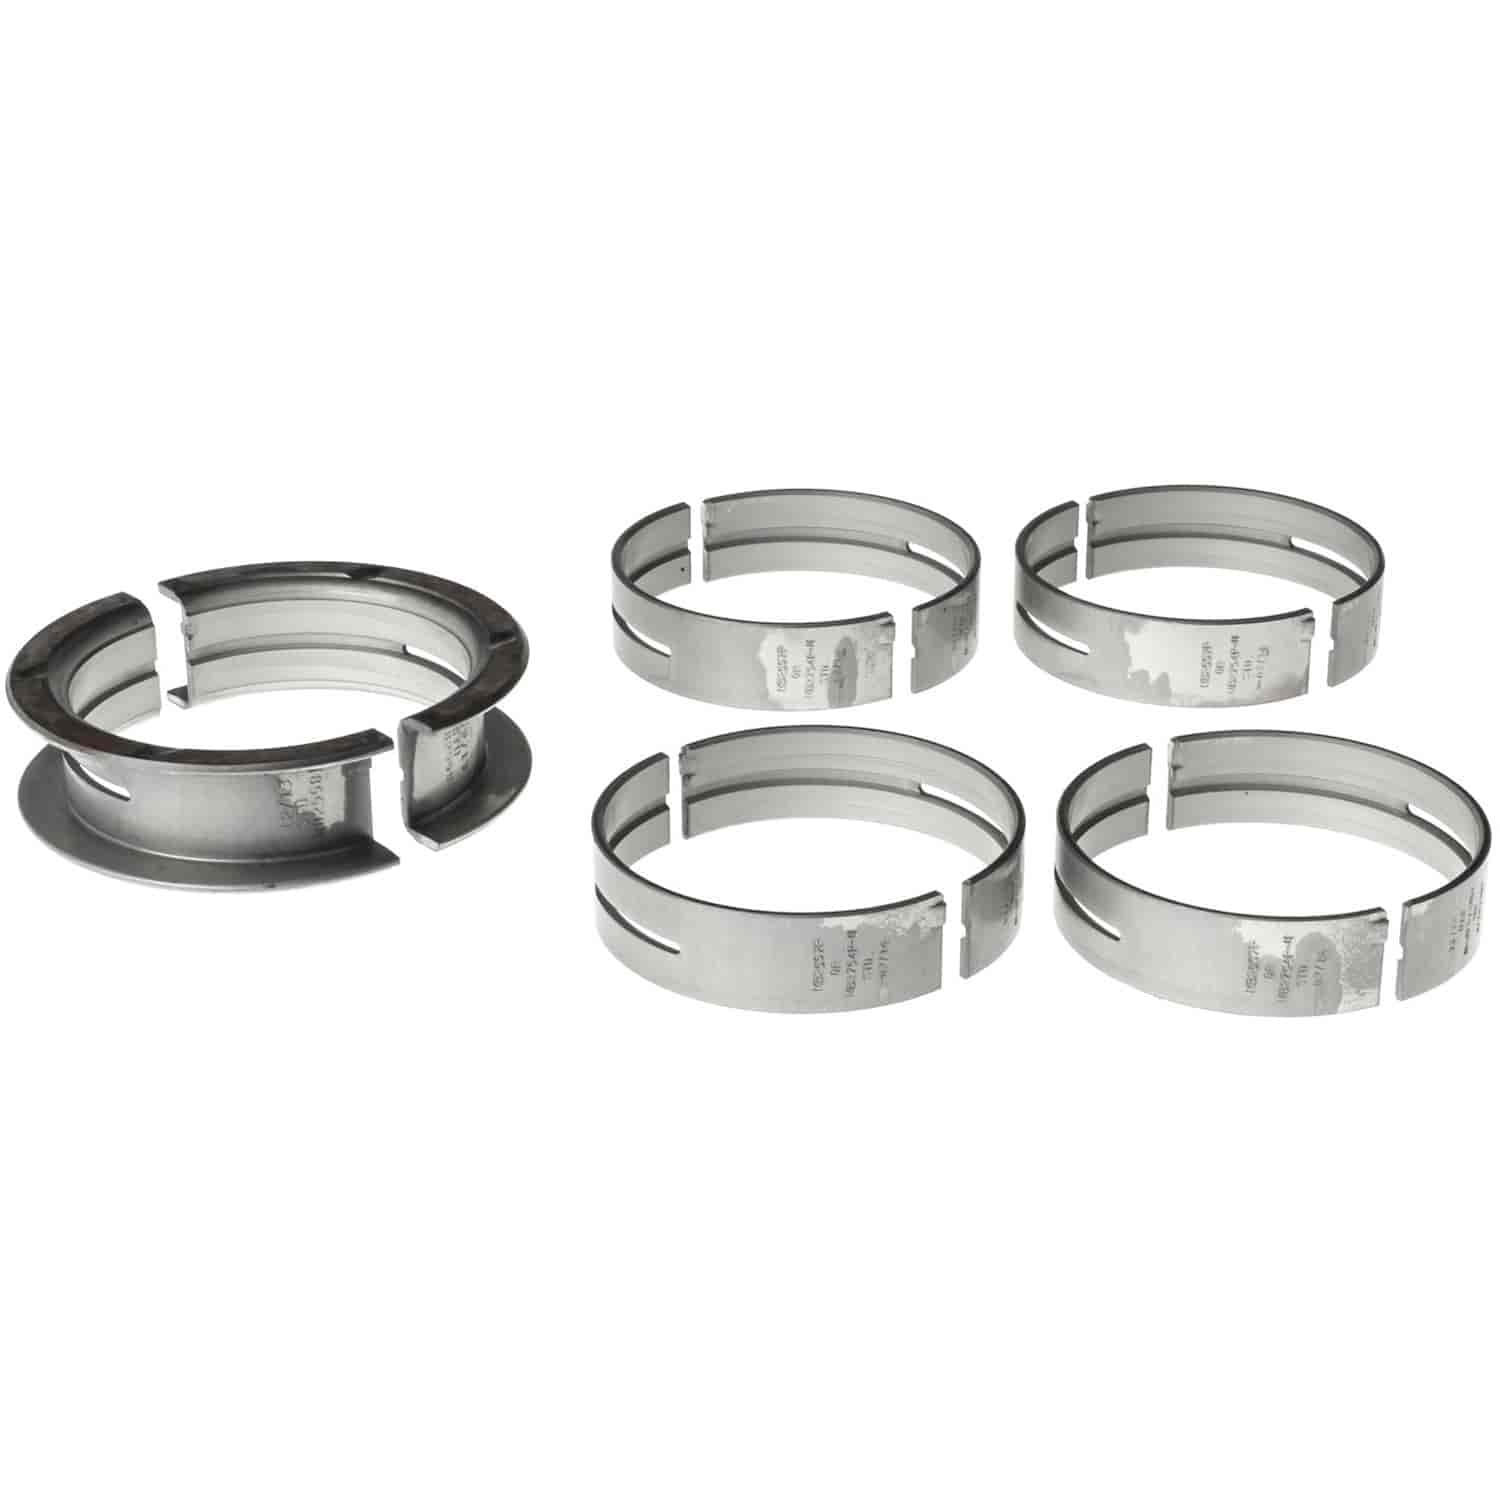 Main Bearing Set Ford 1969-1997 V8 351W/351M/400 (5.8/6.6L) with -.030" Undersize